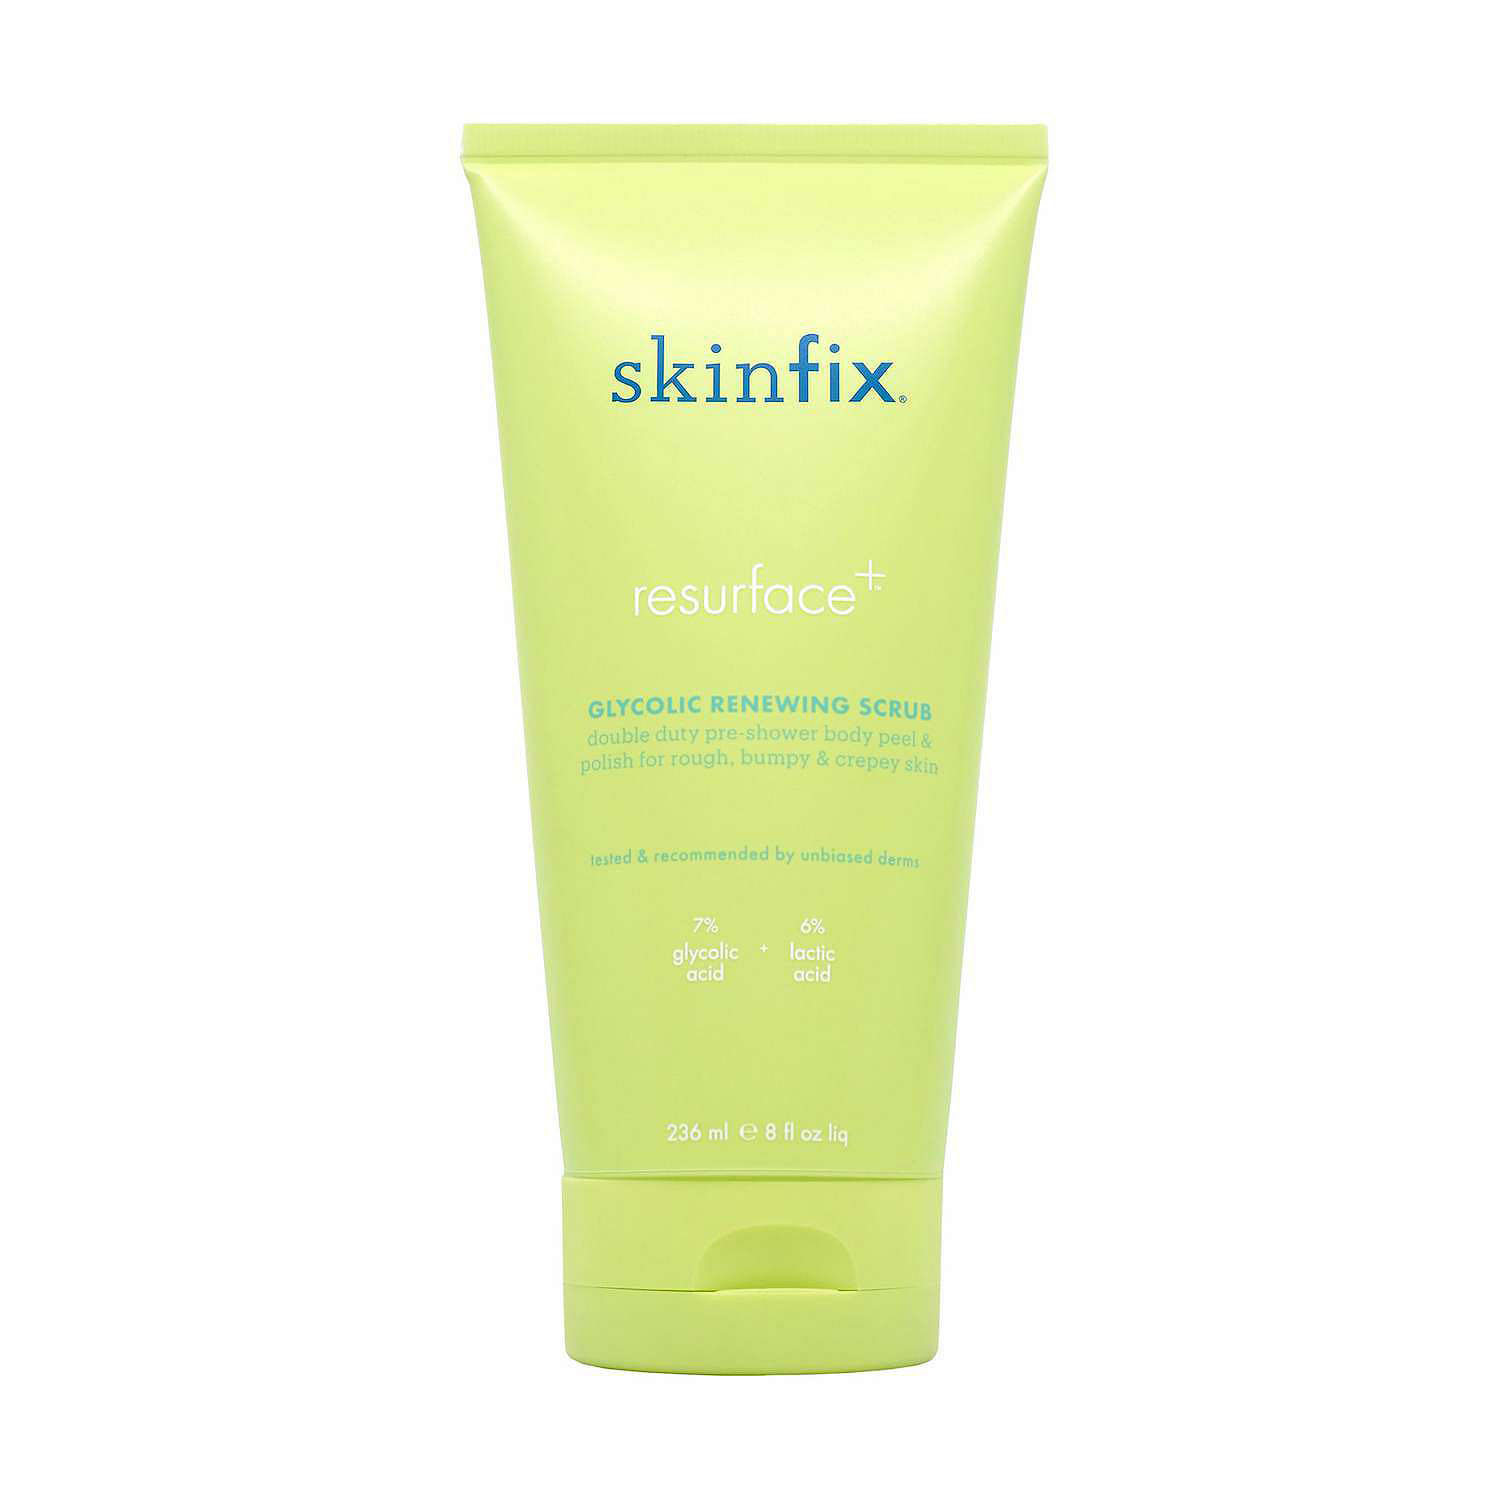 bright green bottle of Skinfix Resurface+ Glycolic and Lactic Acid Renewing Body Scrub 